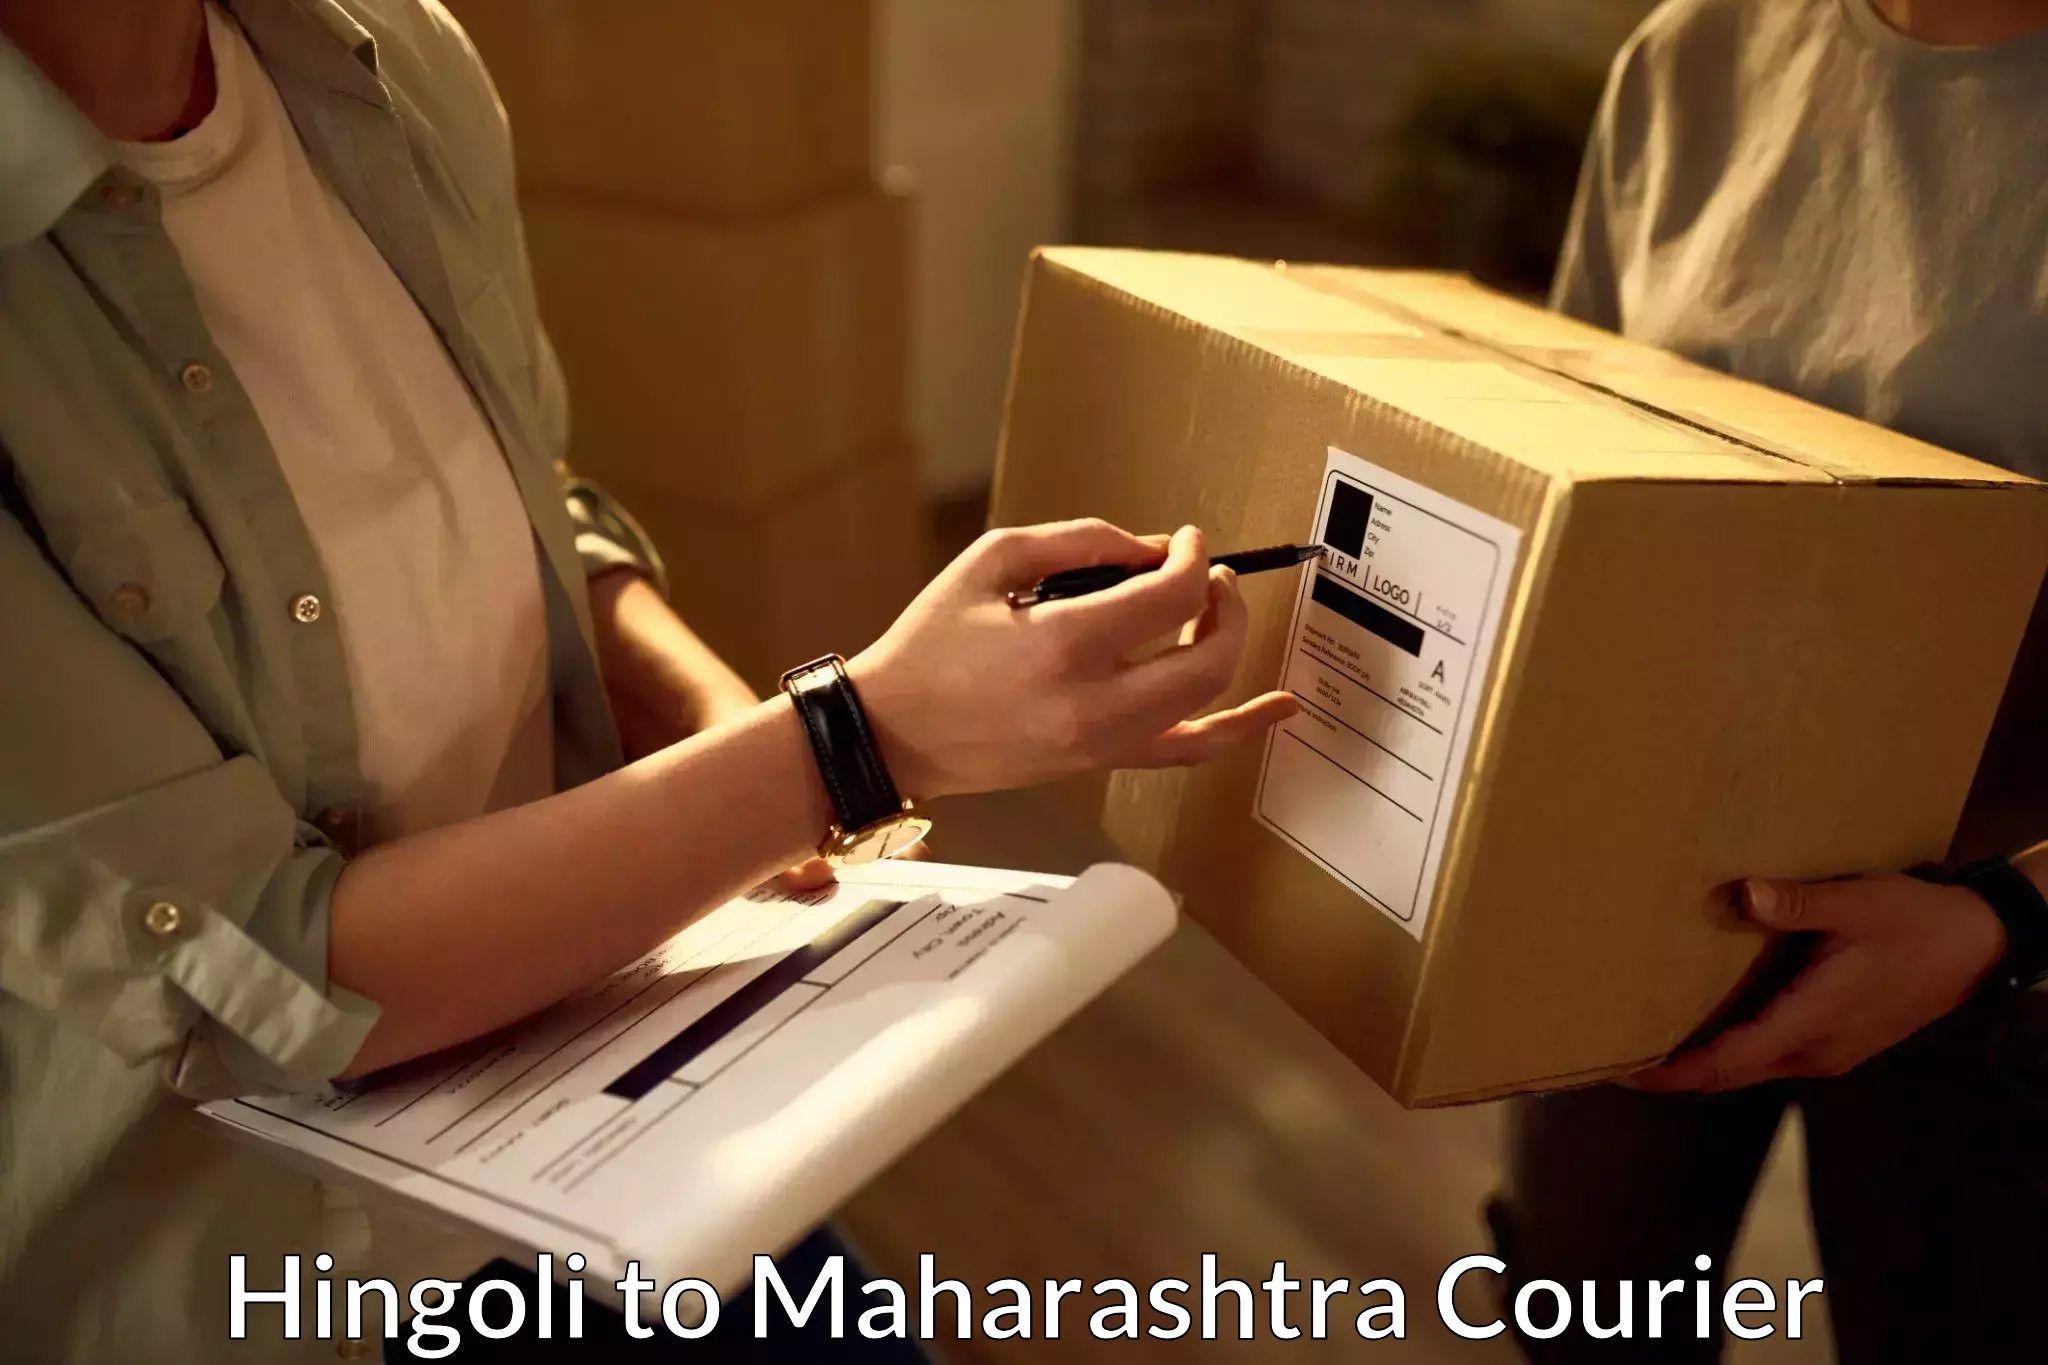 Overnight delivery services Hingoli to Lonavala